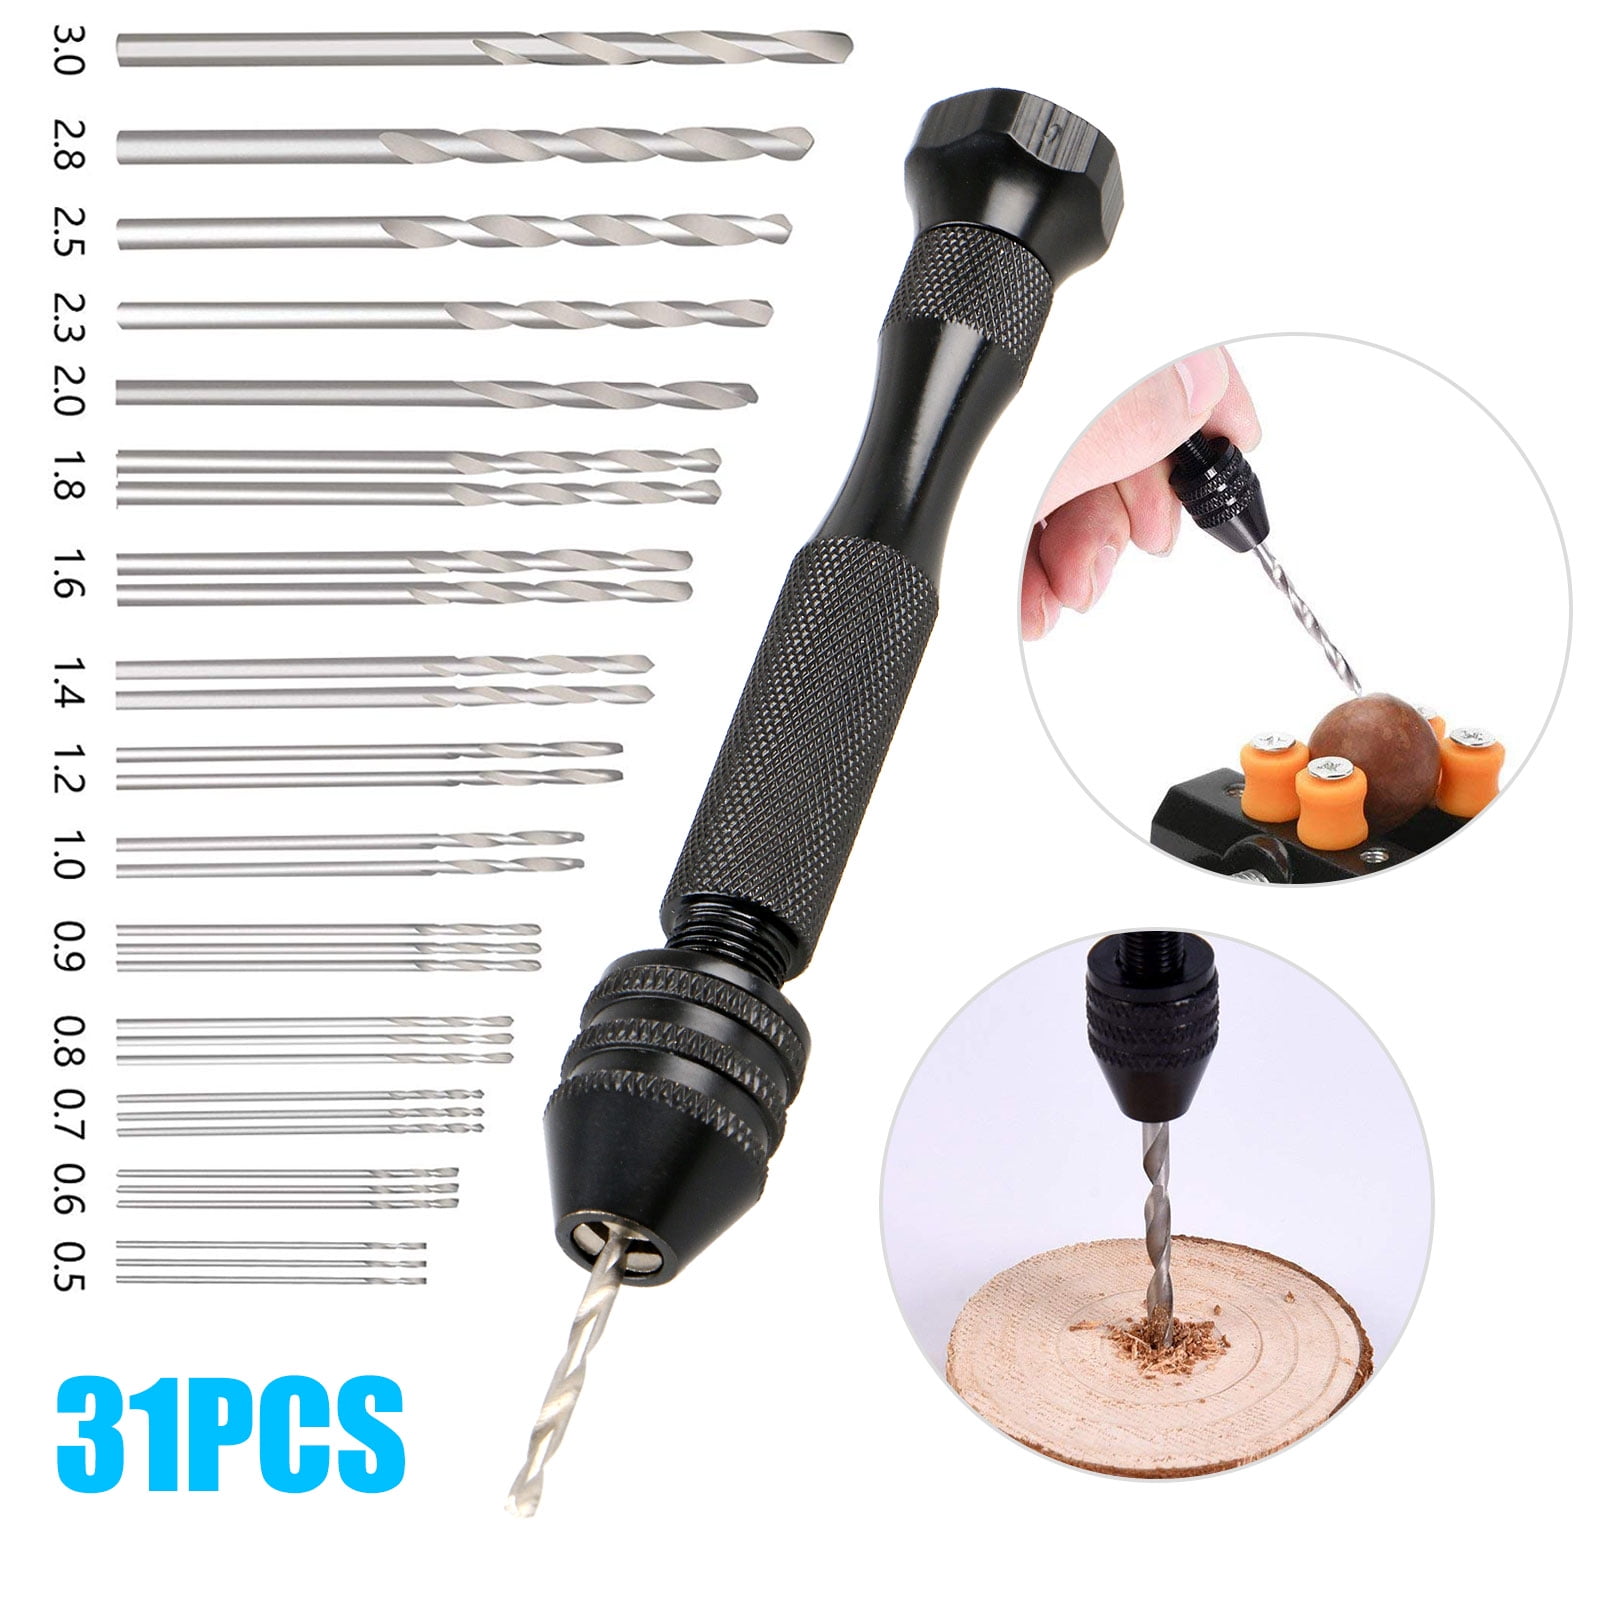 Precision Hand Pin Vise Rotary Tools Mini Rotary Drilling Kit with 10 Twist Drills Jewelry Portable DIY Steel Wood Drill Jewelry Engravings Tools for Model Making Hand Drill Set DIY Wood